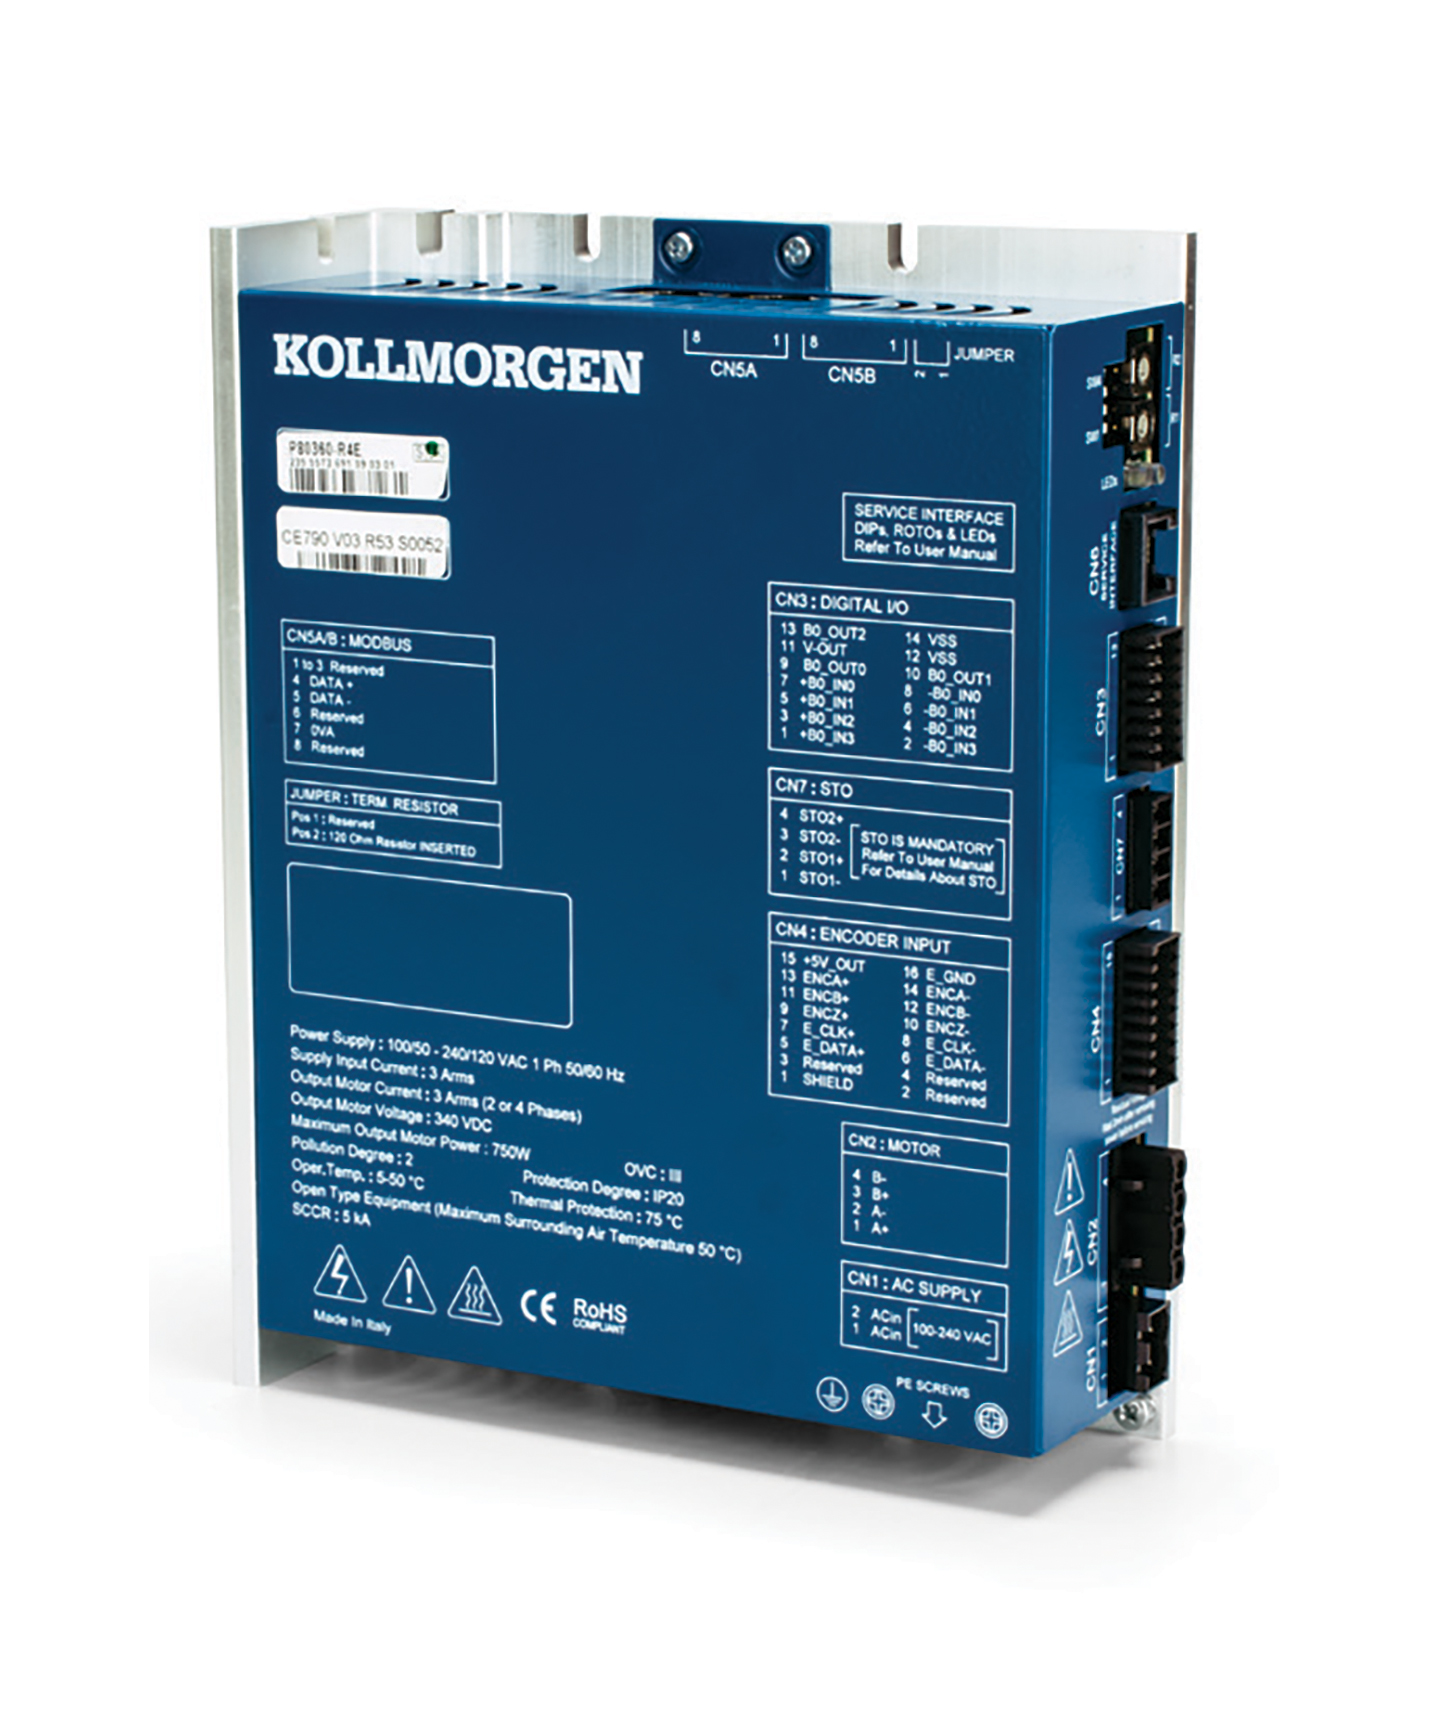 Kollmorgen’s P8000 stepper drive platform offers real-time position correction through closed-loop feedback.